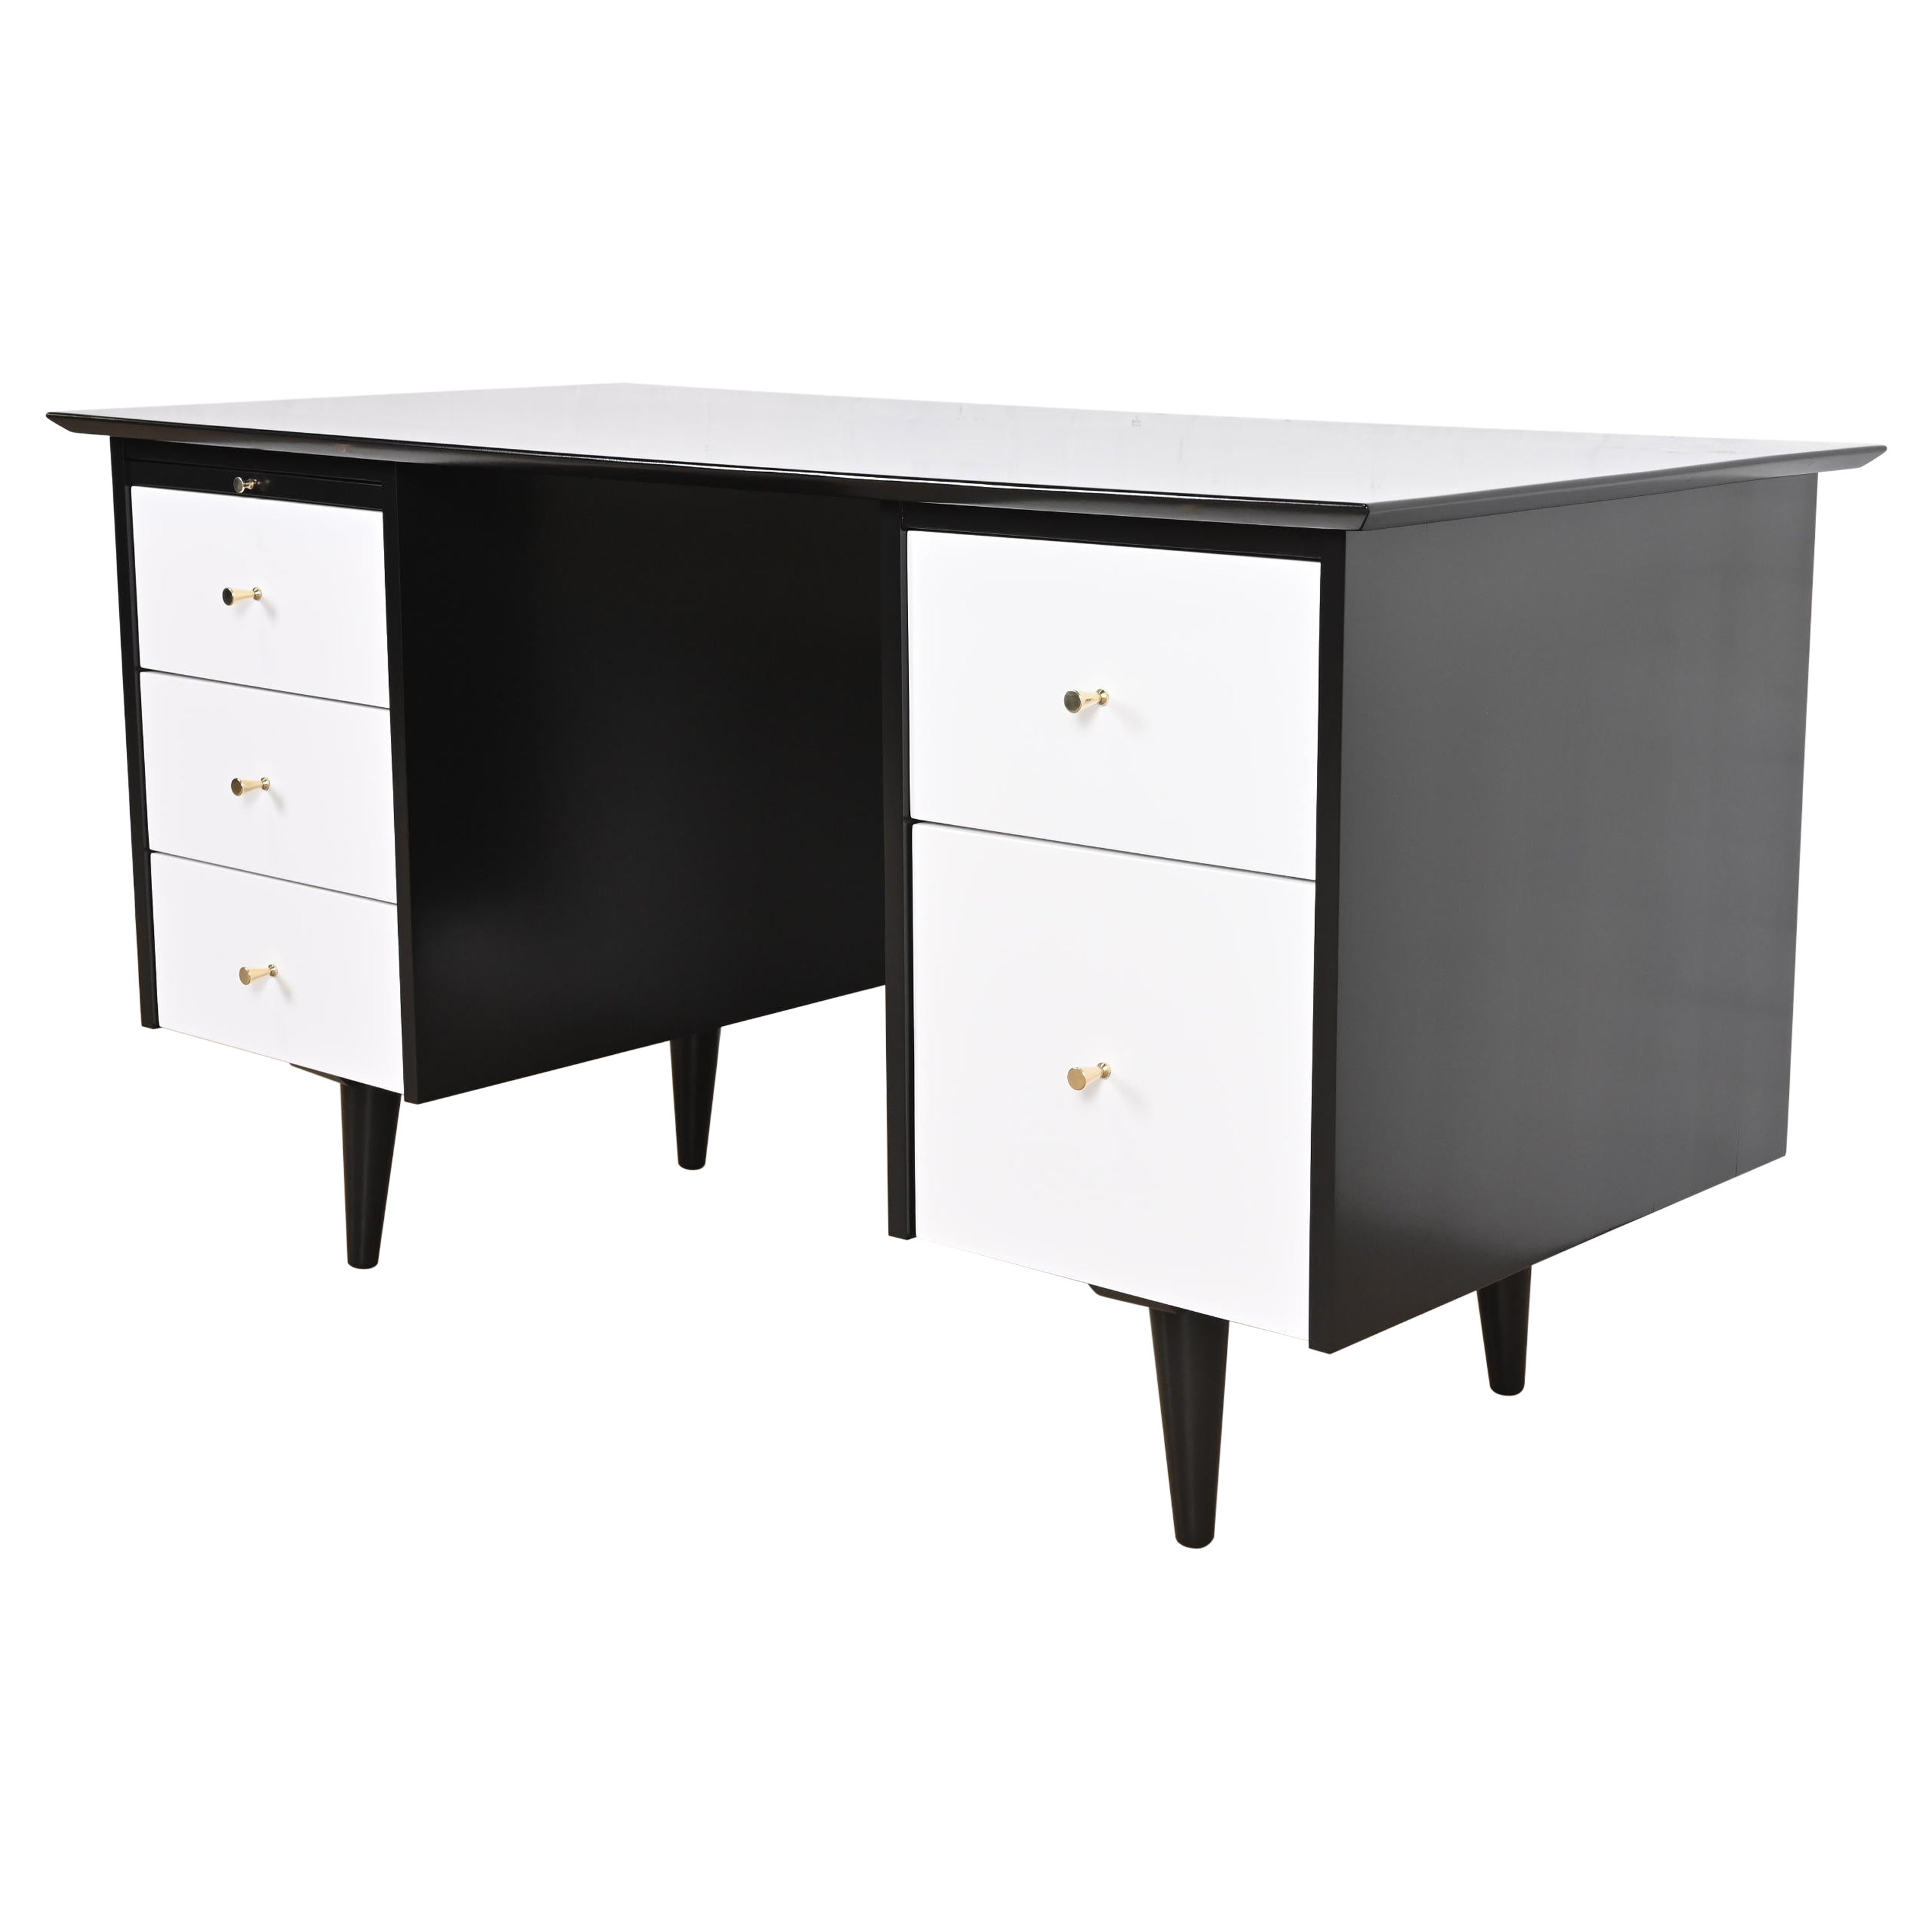 Paul McCobb Planner Group Black and White Lacquered Double Pedestal Desk, 1950s